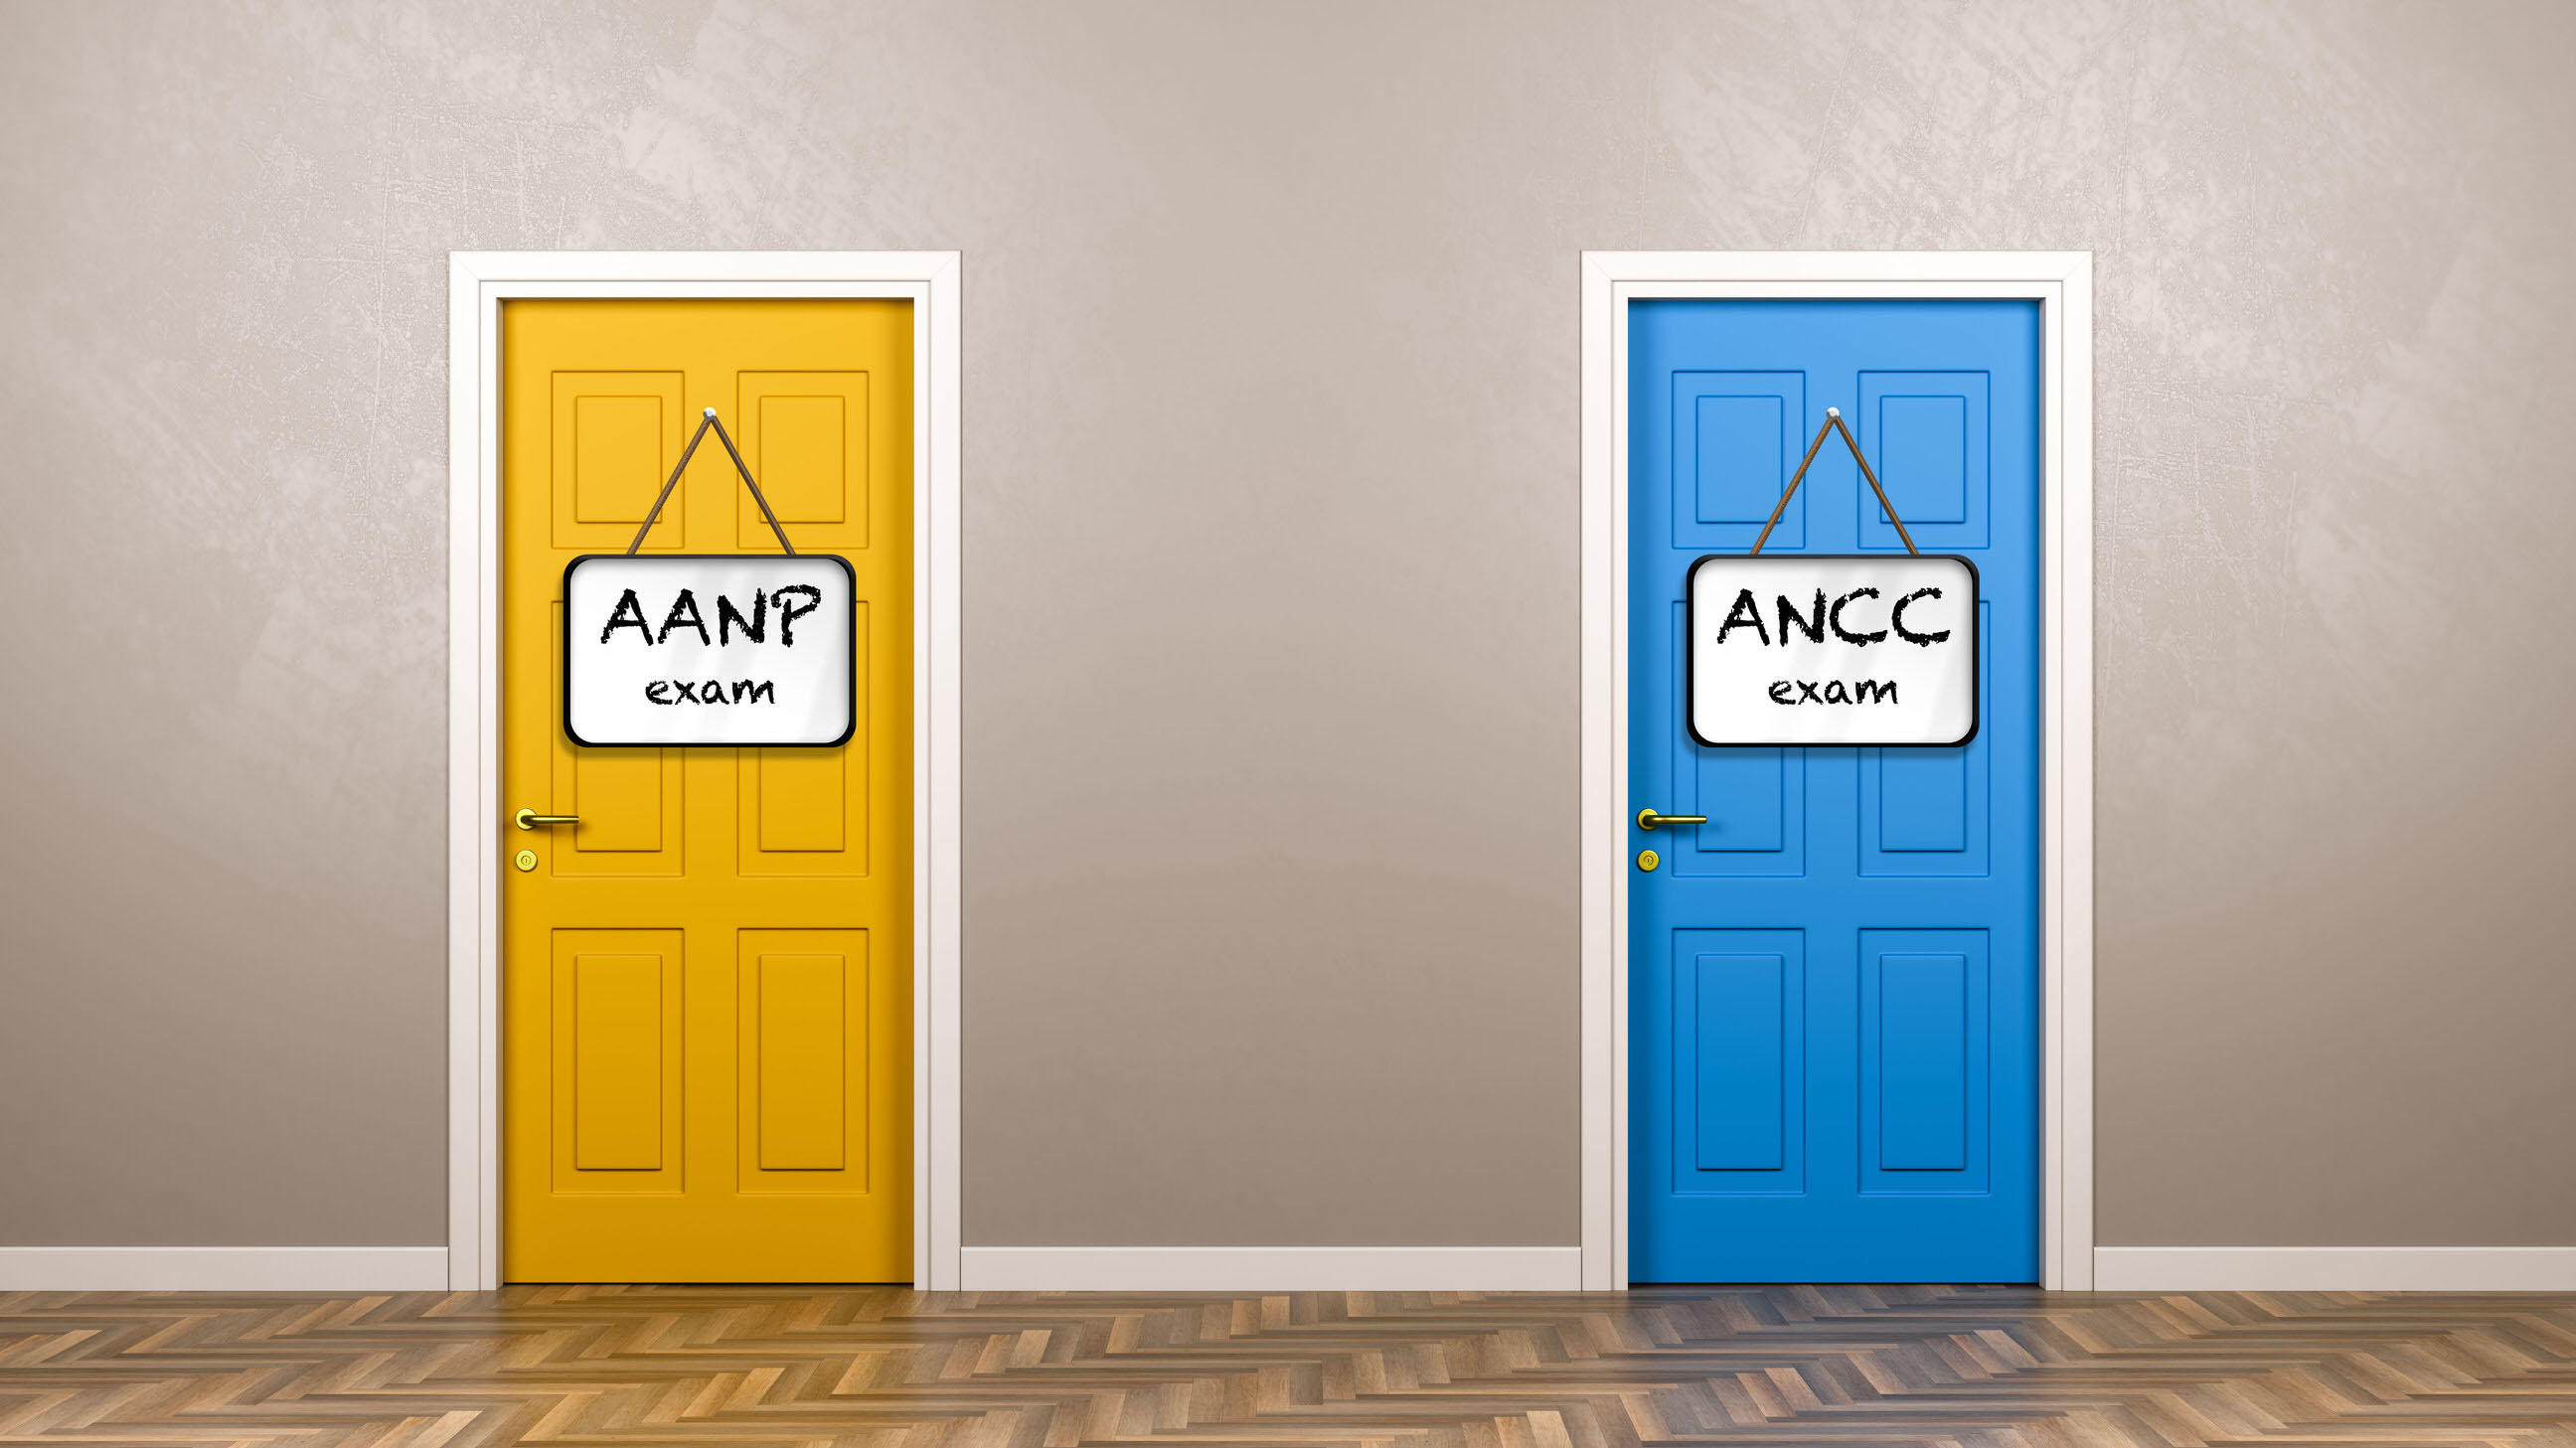 Should I Take the AANP or ANCC Certification Exam?